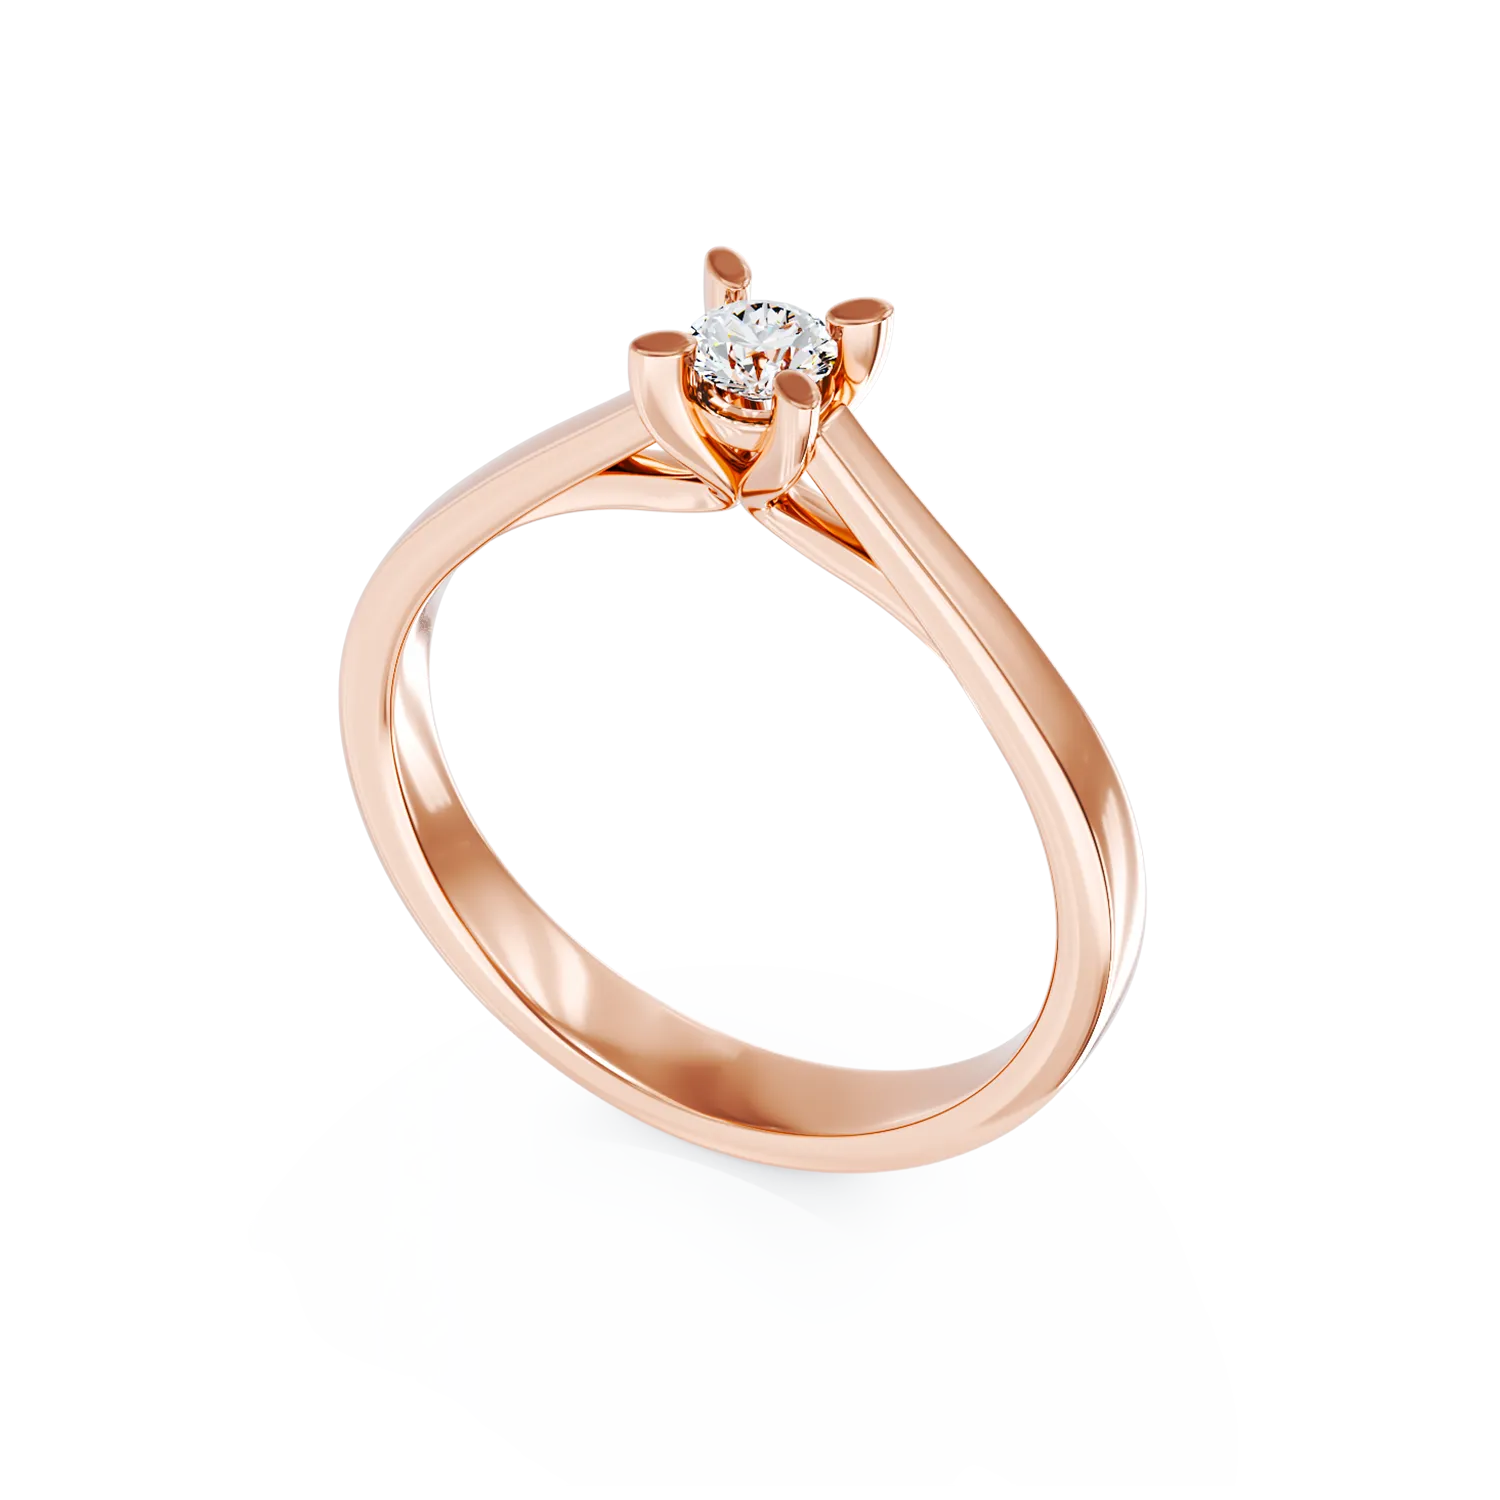 18K rose gold engagement ring with 0.1ct solitaire diamond